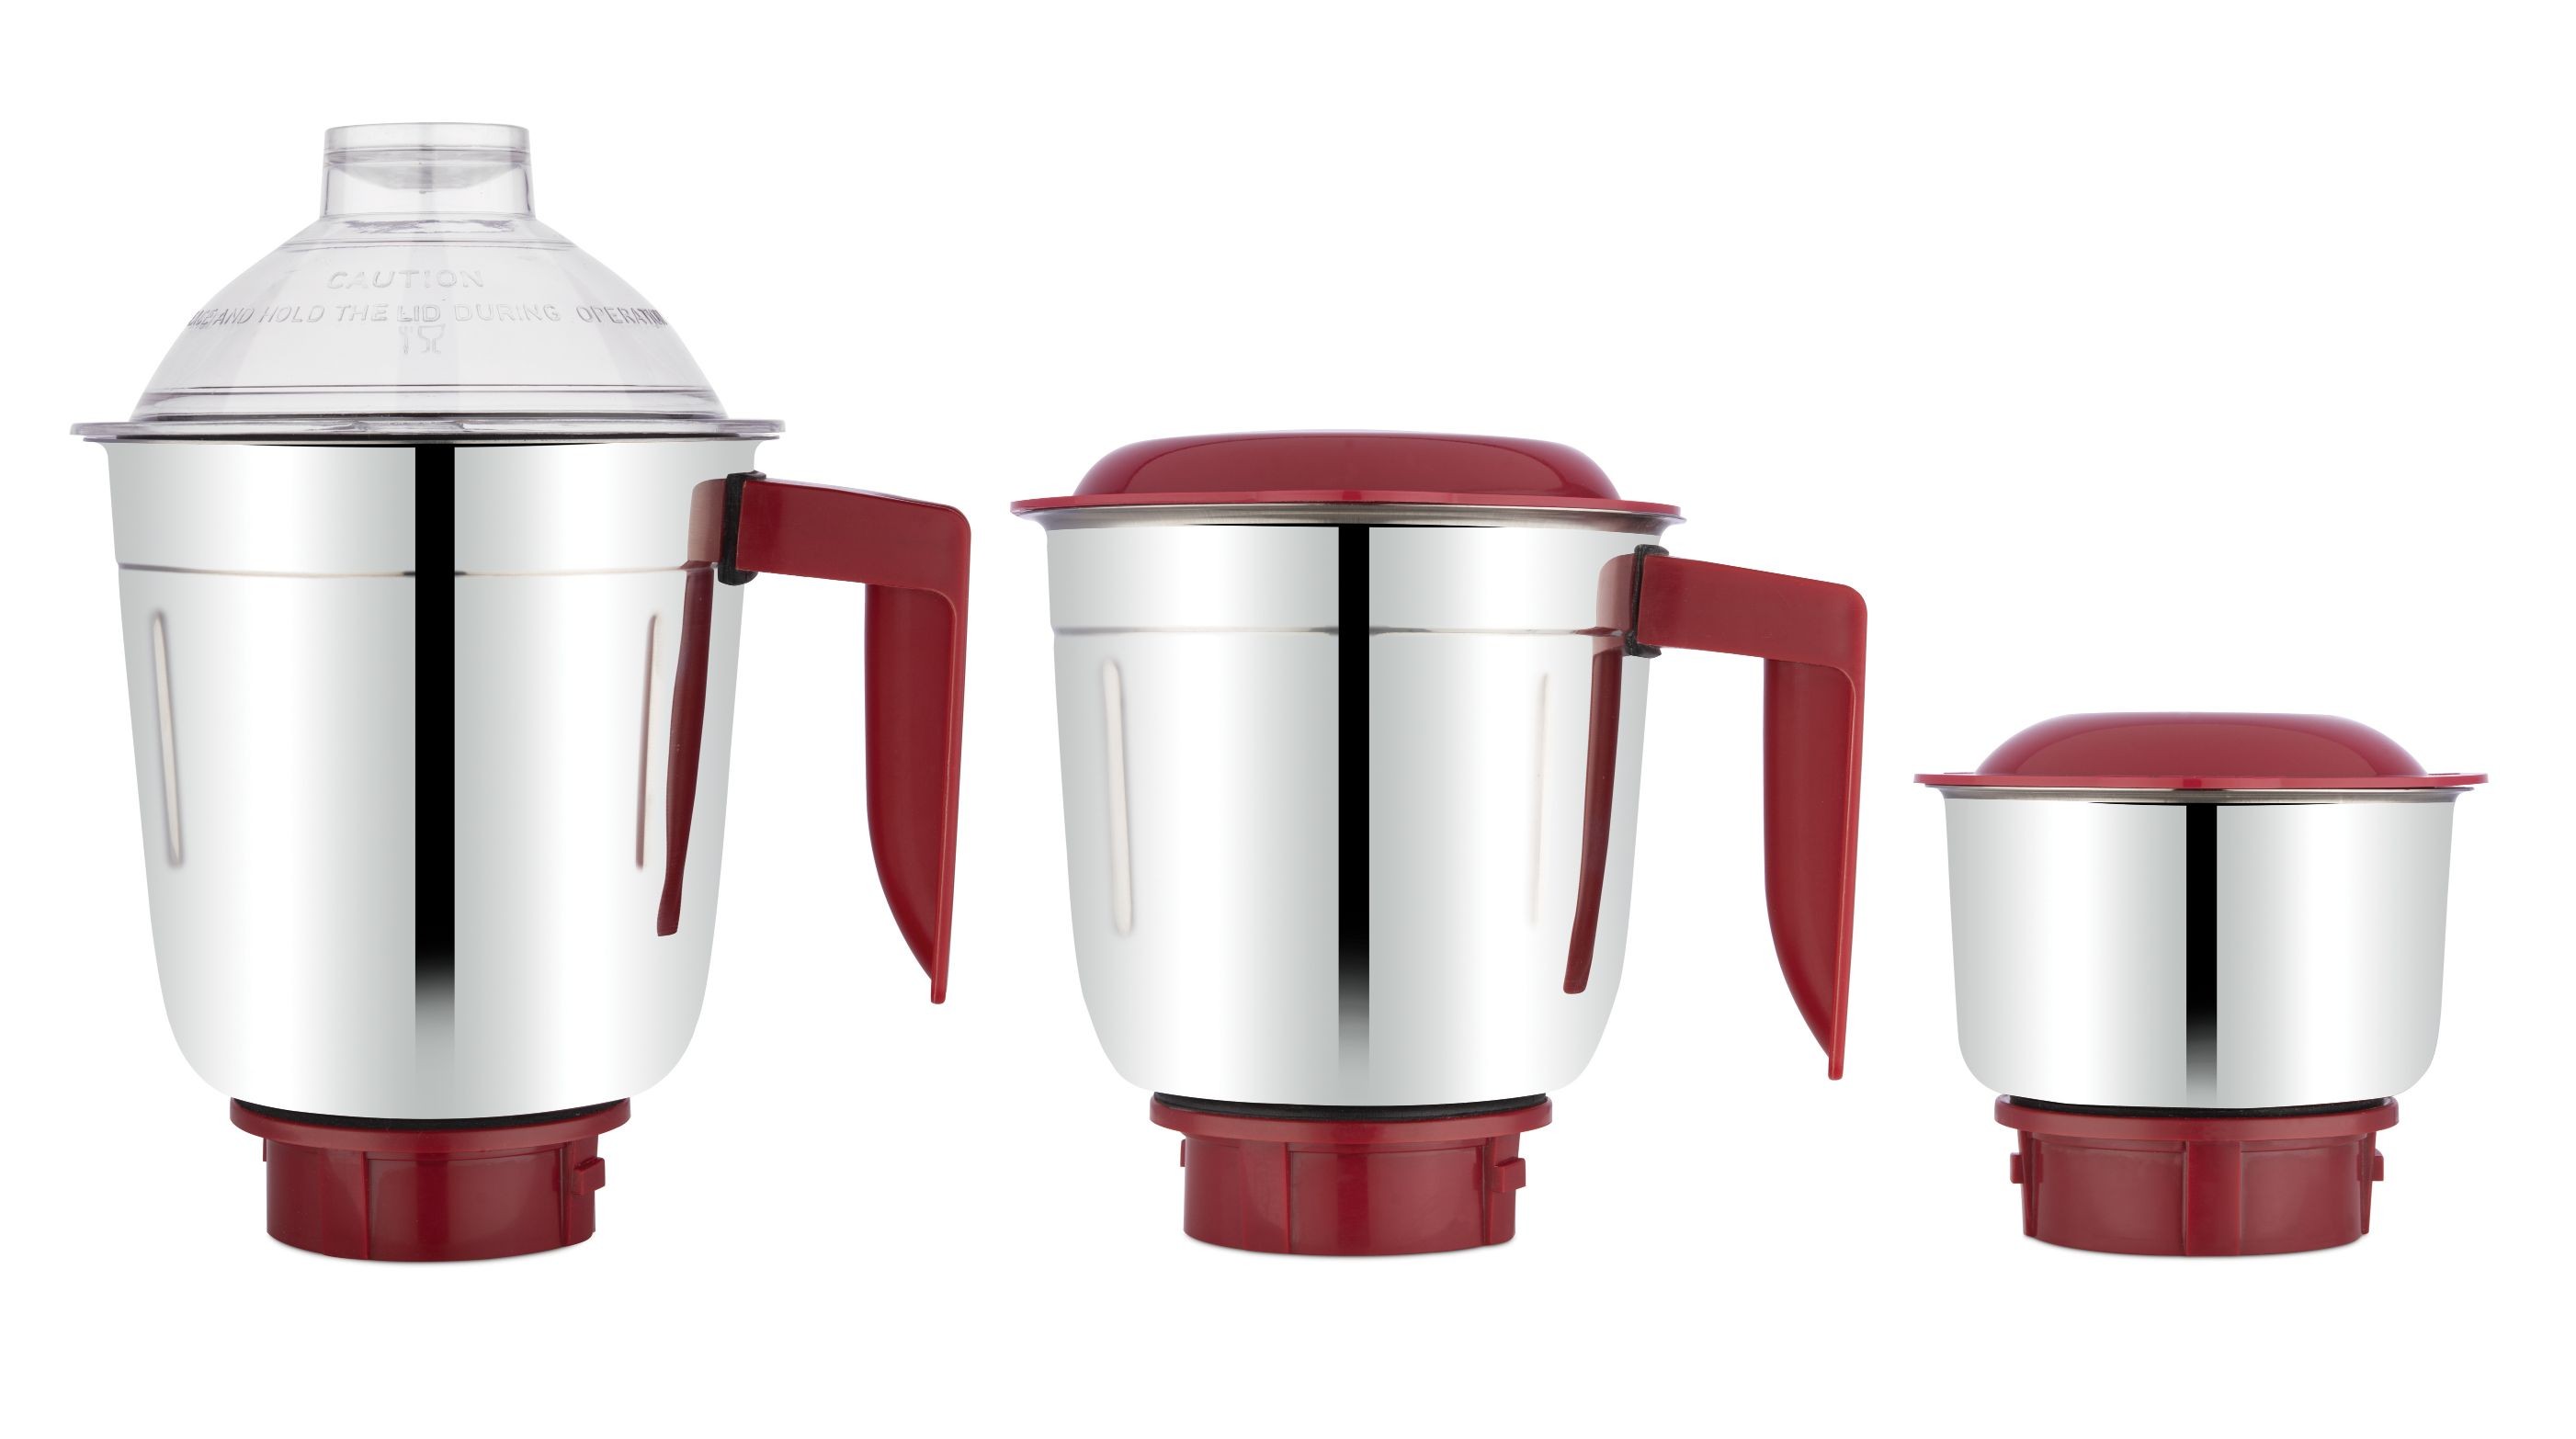 bajaj-classic-indian-mixer-grinder-600w-stainless-steel-jars-indian-mixer-grinder-spice-coffee-grinder-110v-for-use-in-canada-usa8